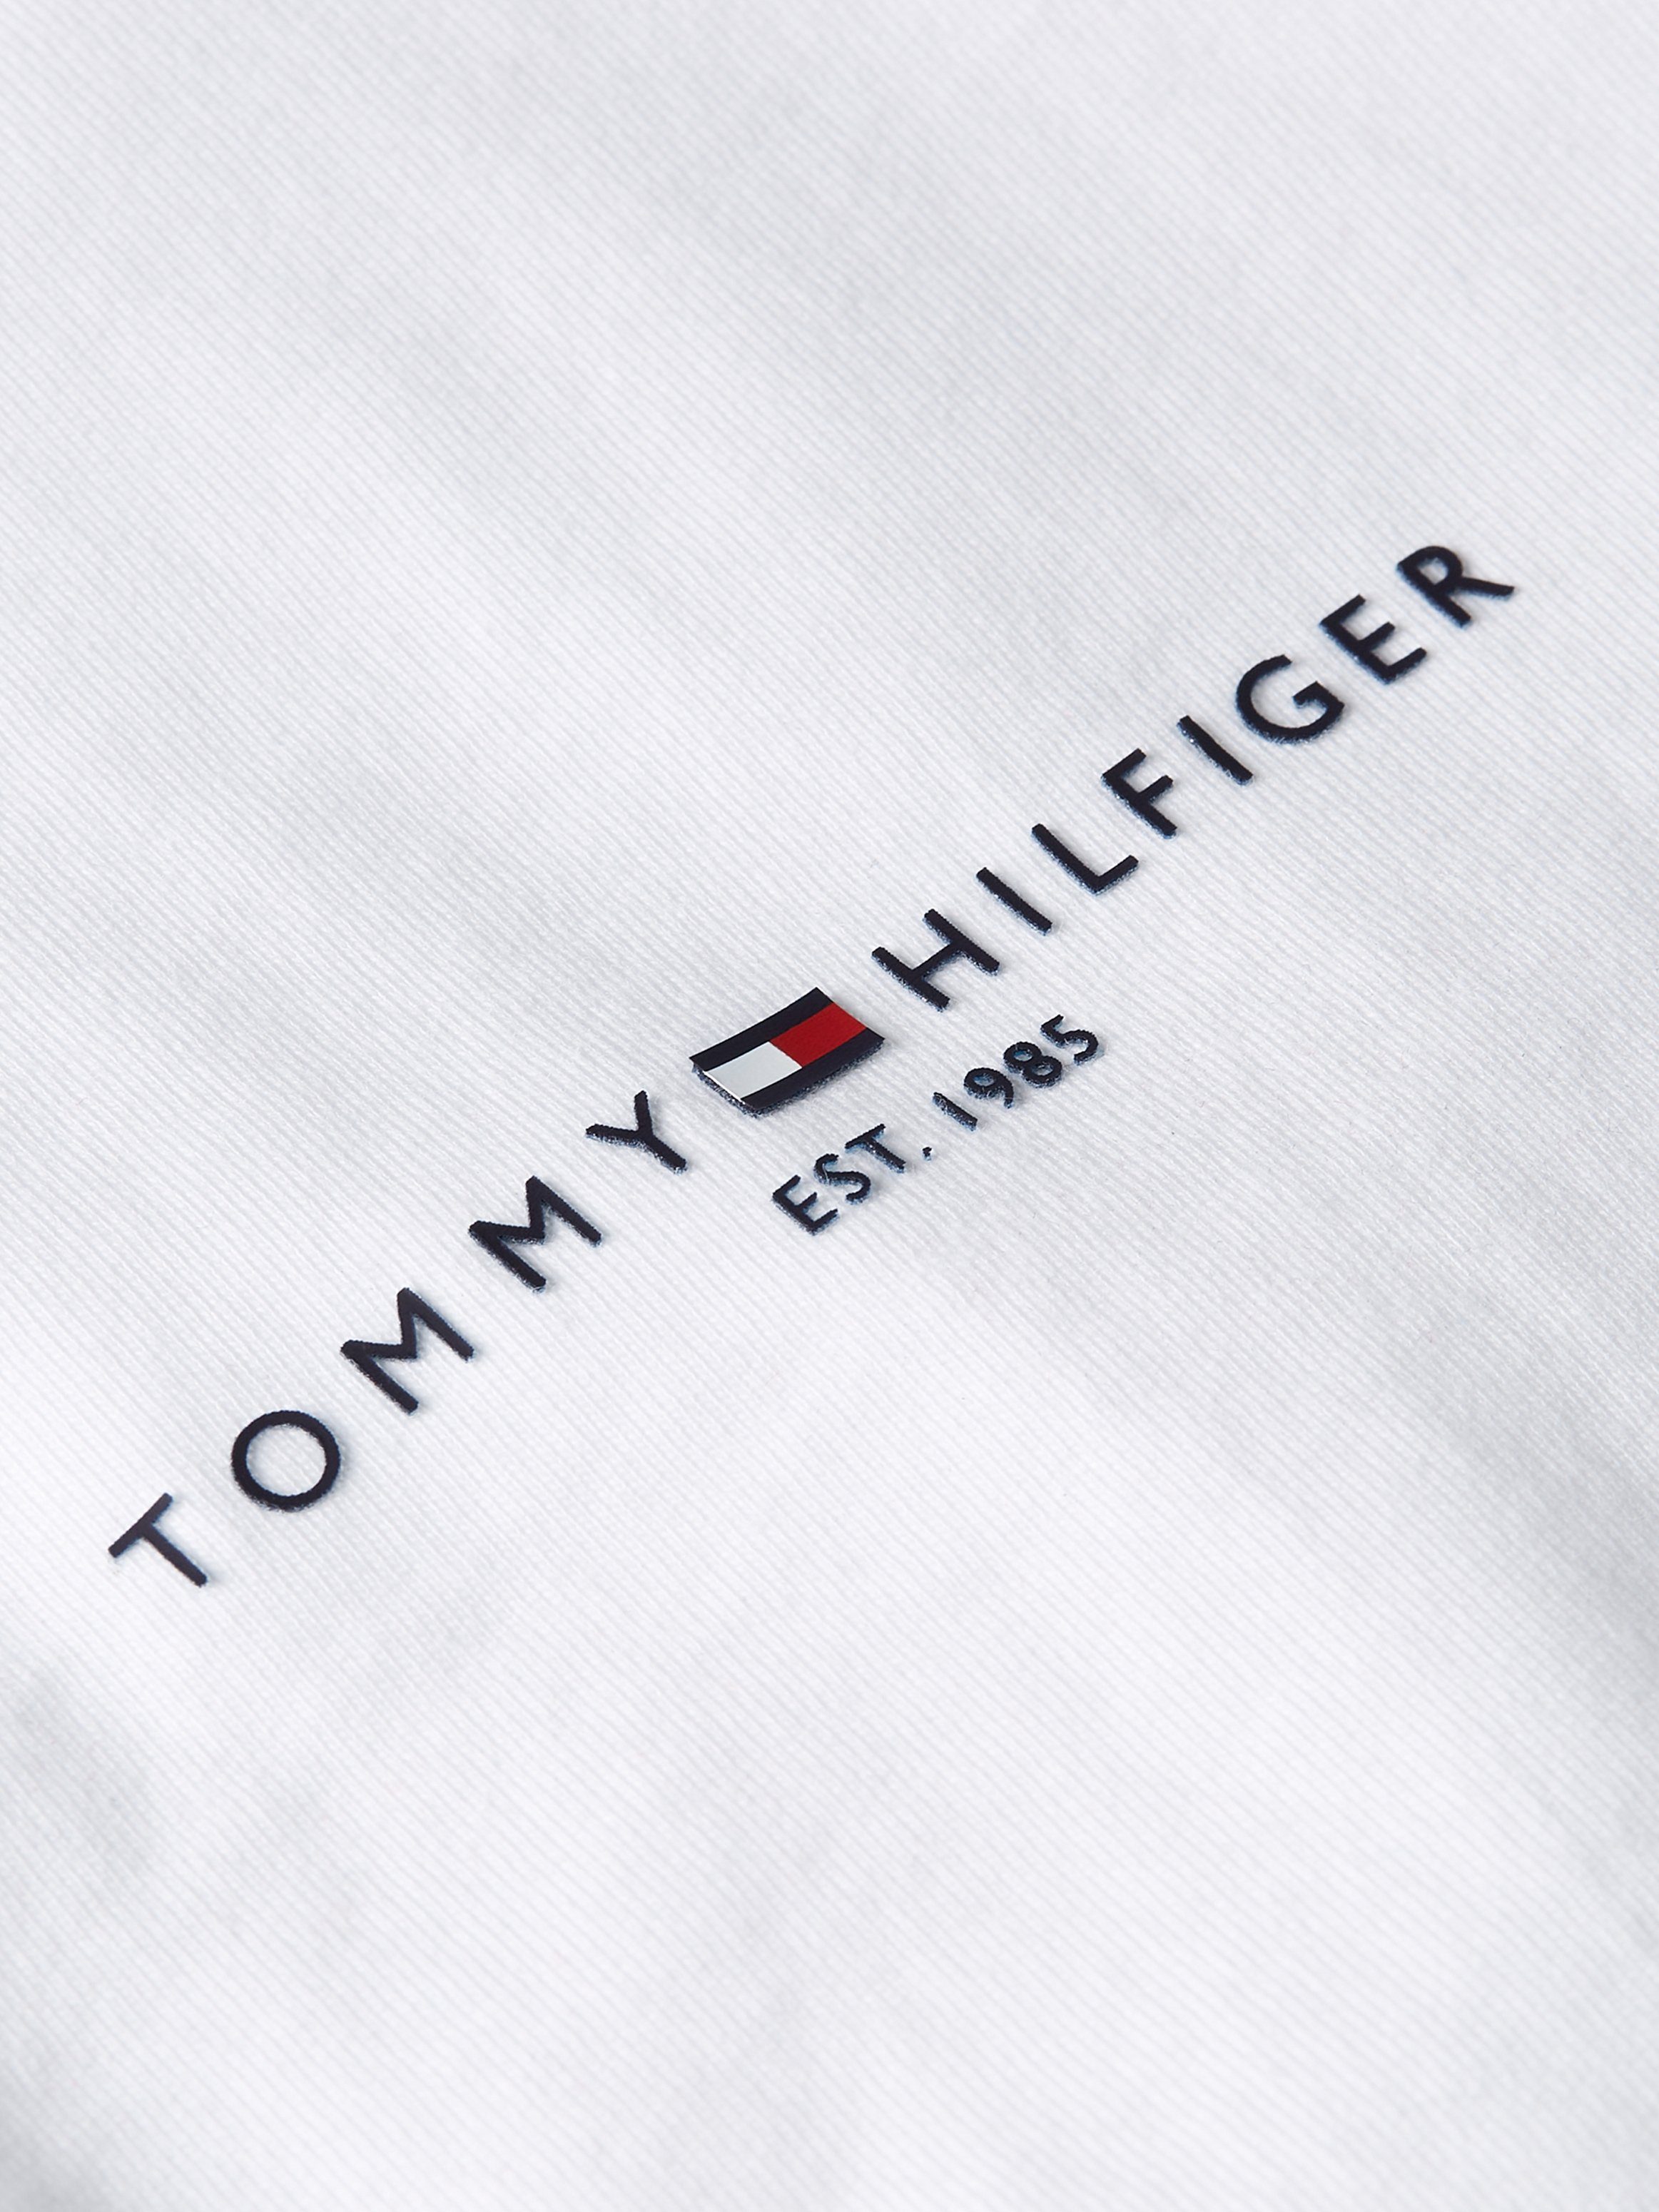 Tommy Hilfiger T-Shirt TOMMY LOGO TIPPED White TEE